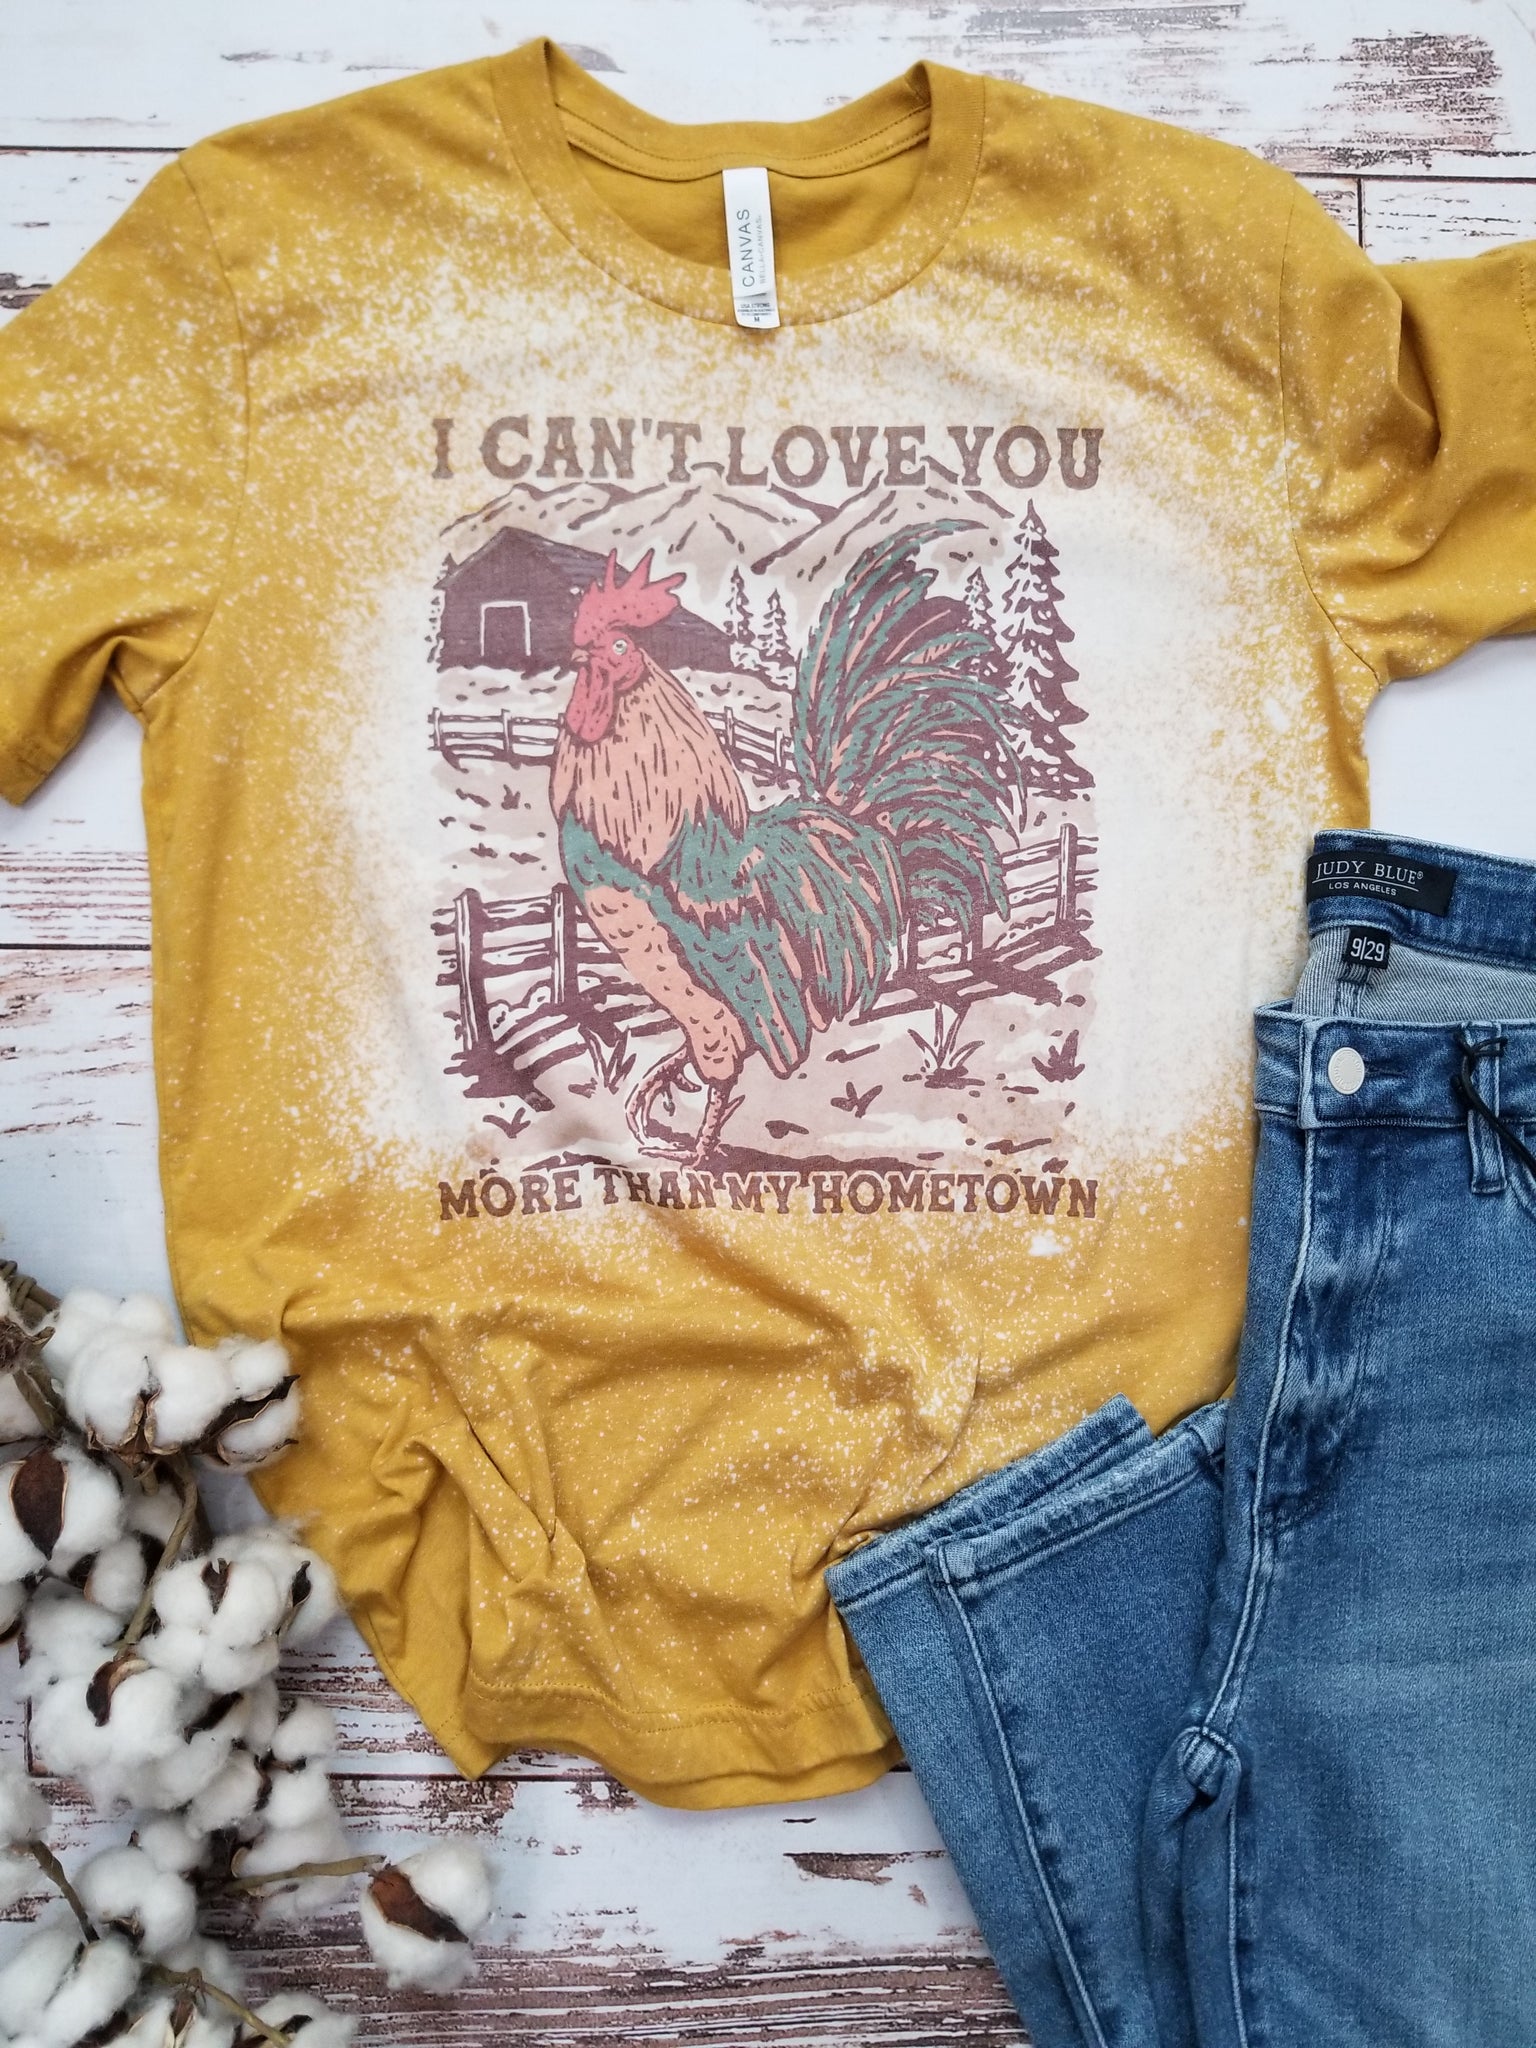 Can't love you like my hometown mustard bleached tee